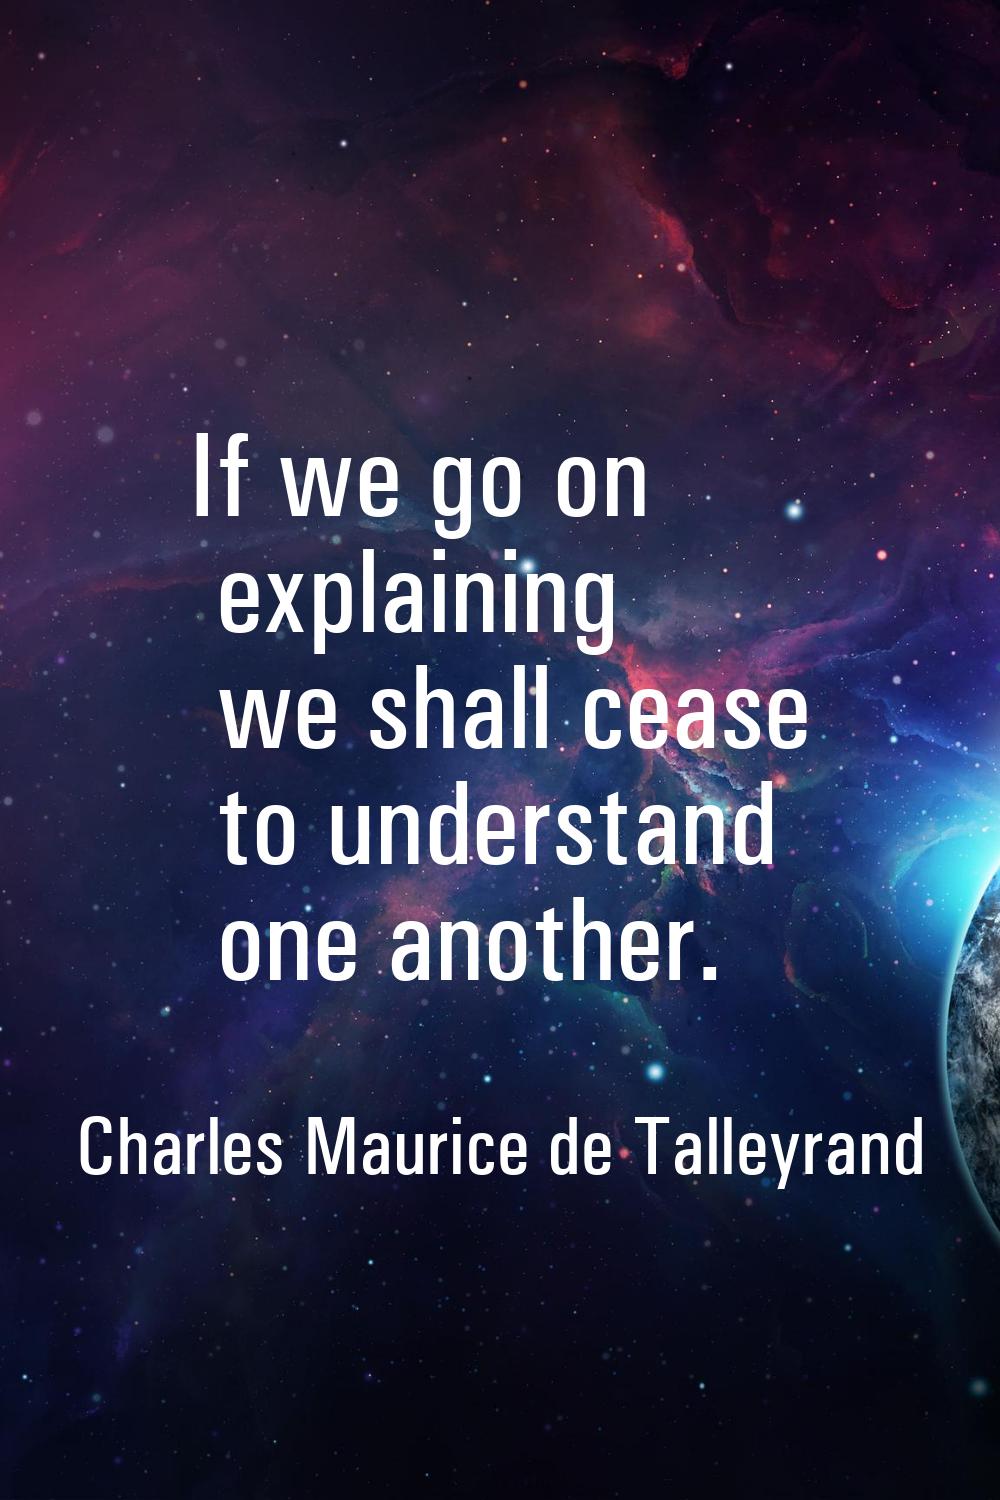 If we go on explaining we shall cease to understand one another.